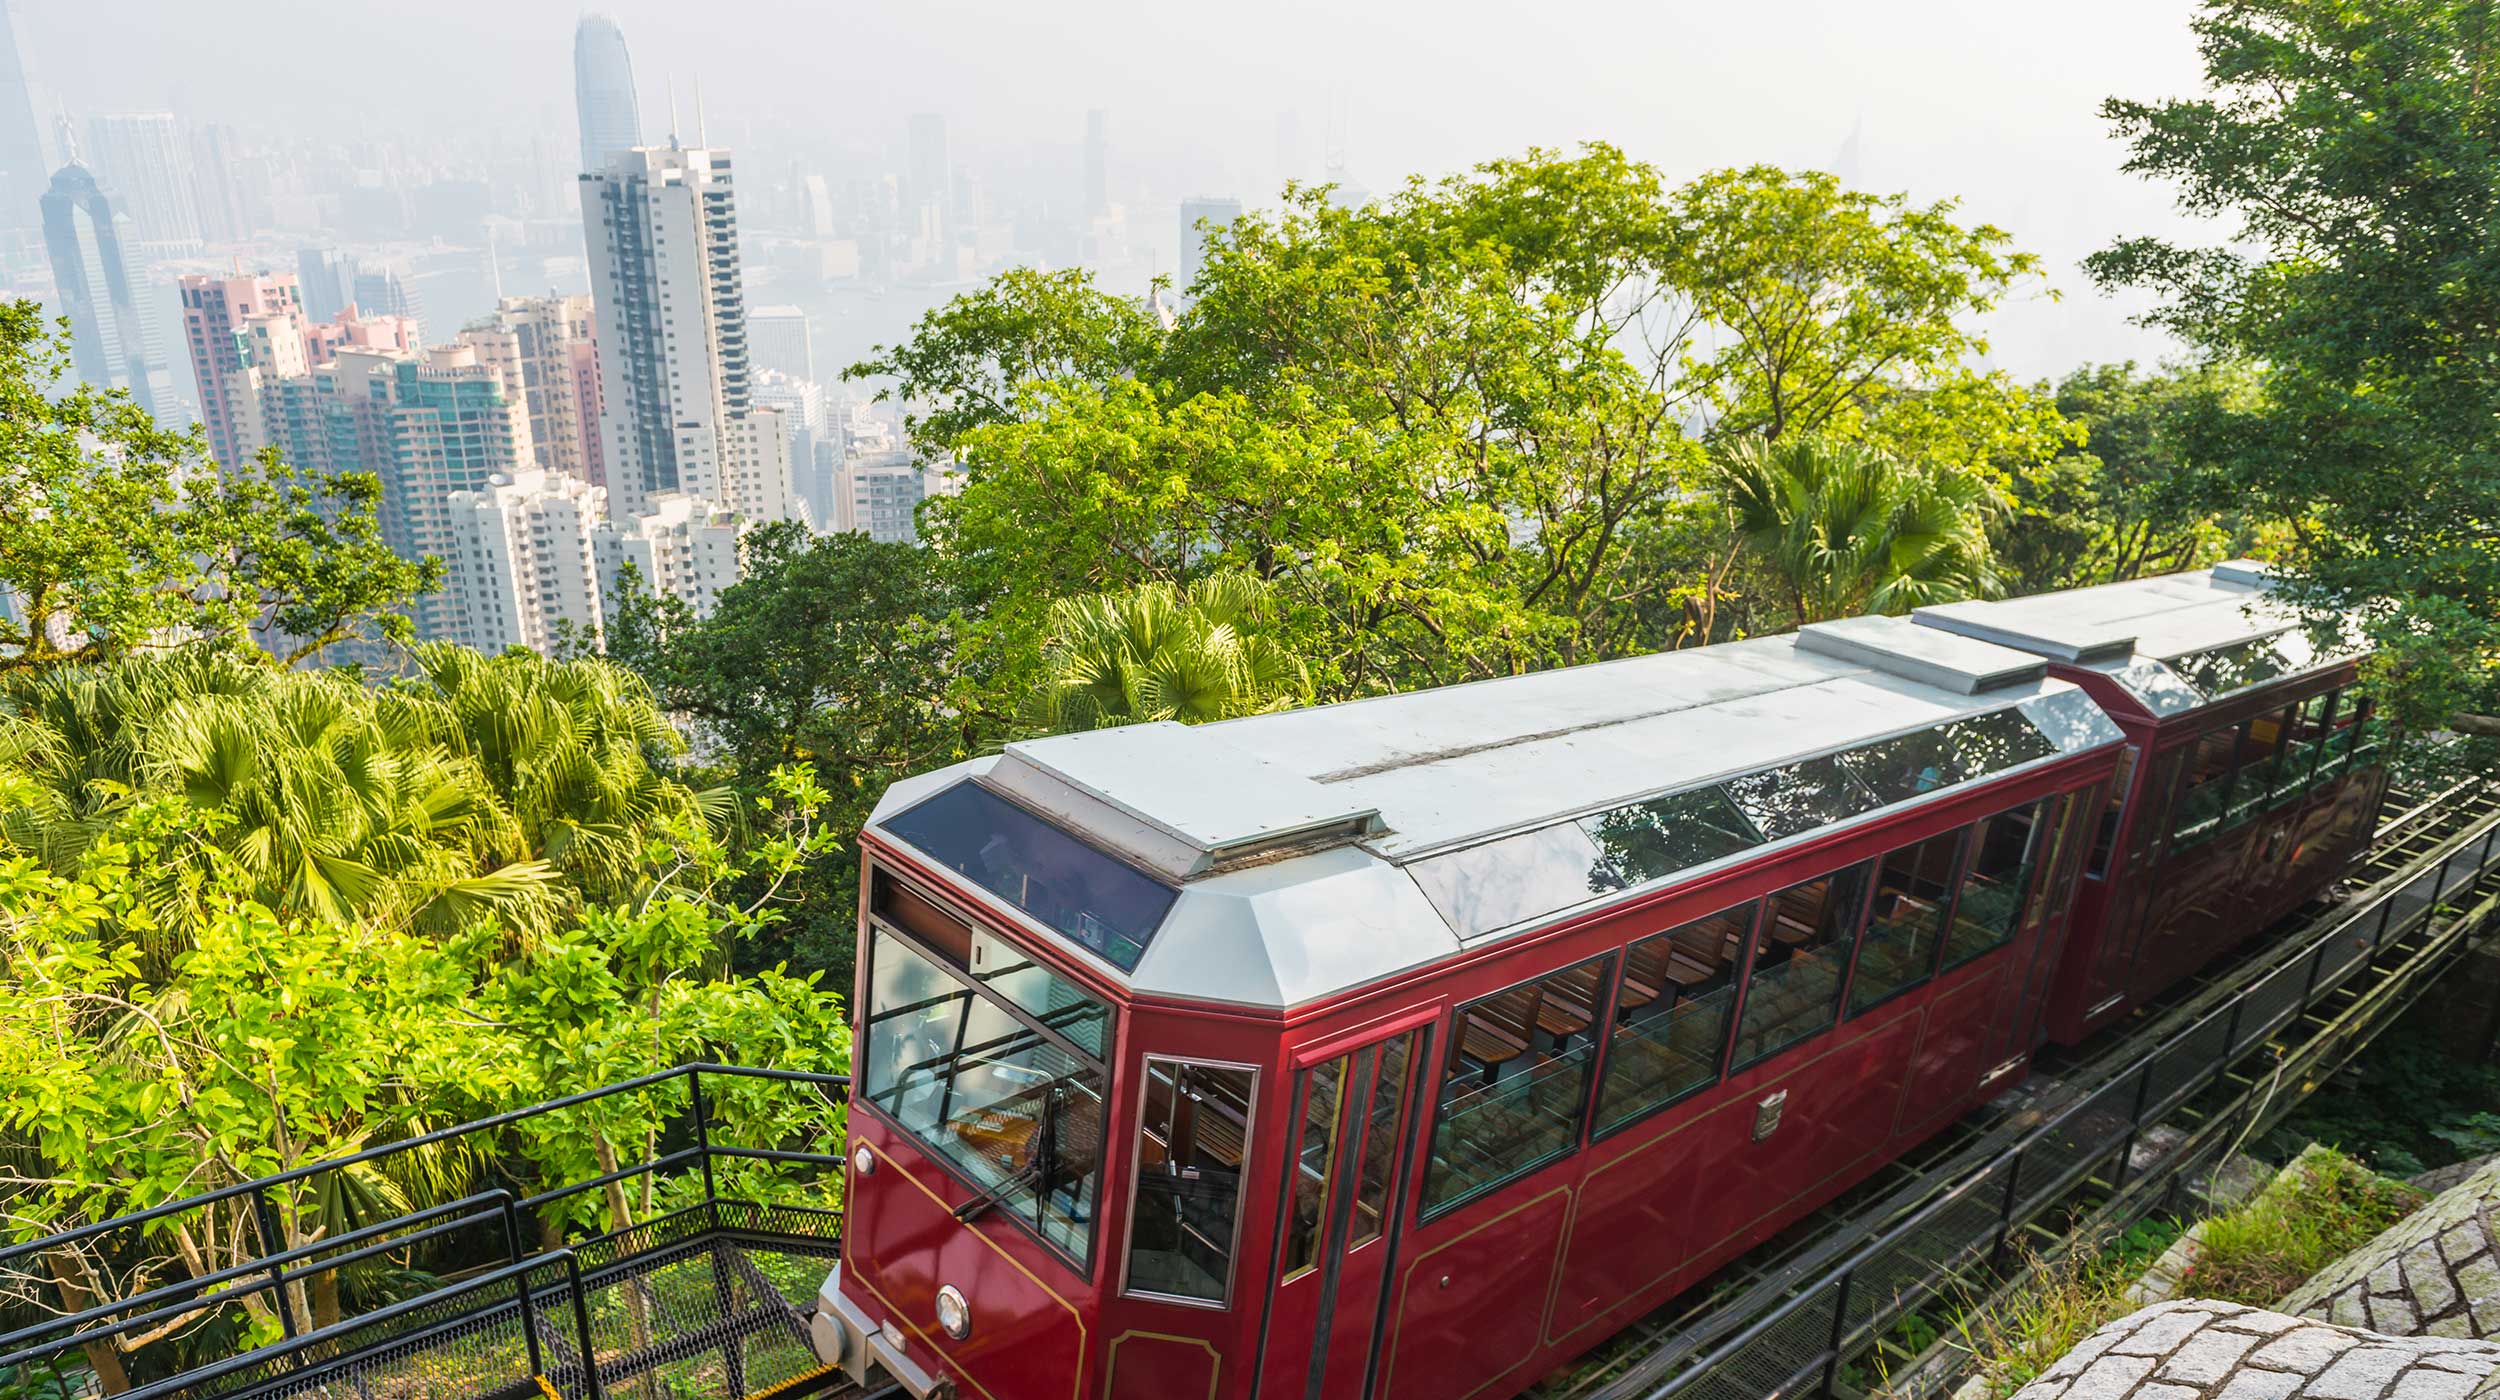 Hong Kong historic red tram climbs Victoria Peak passing skyscrapers in the background